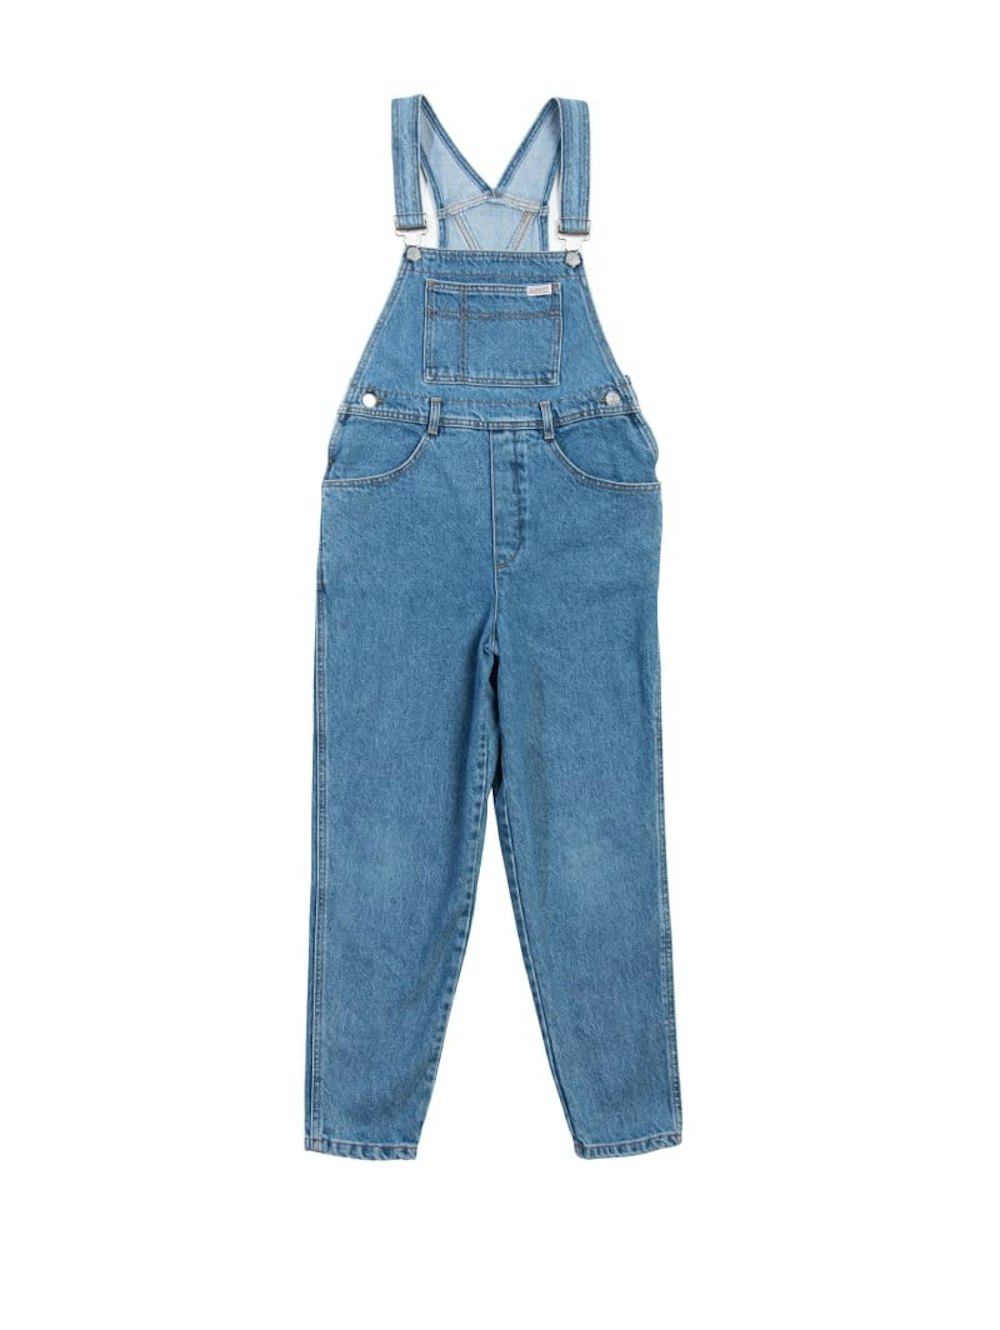 ‘80s GUESS Vintage Overalls